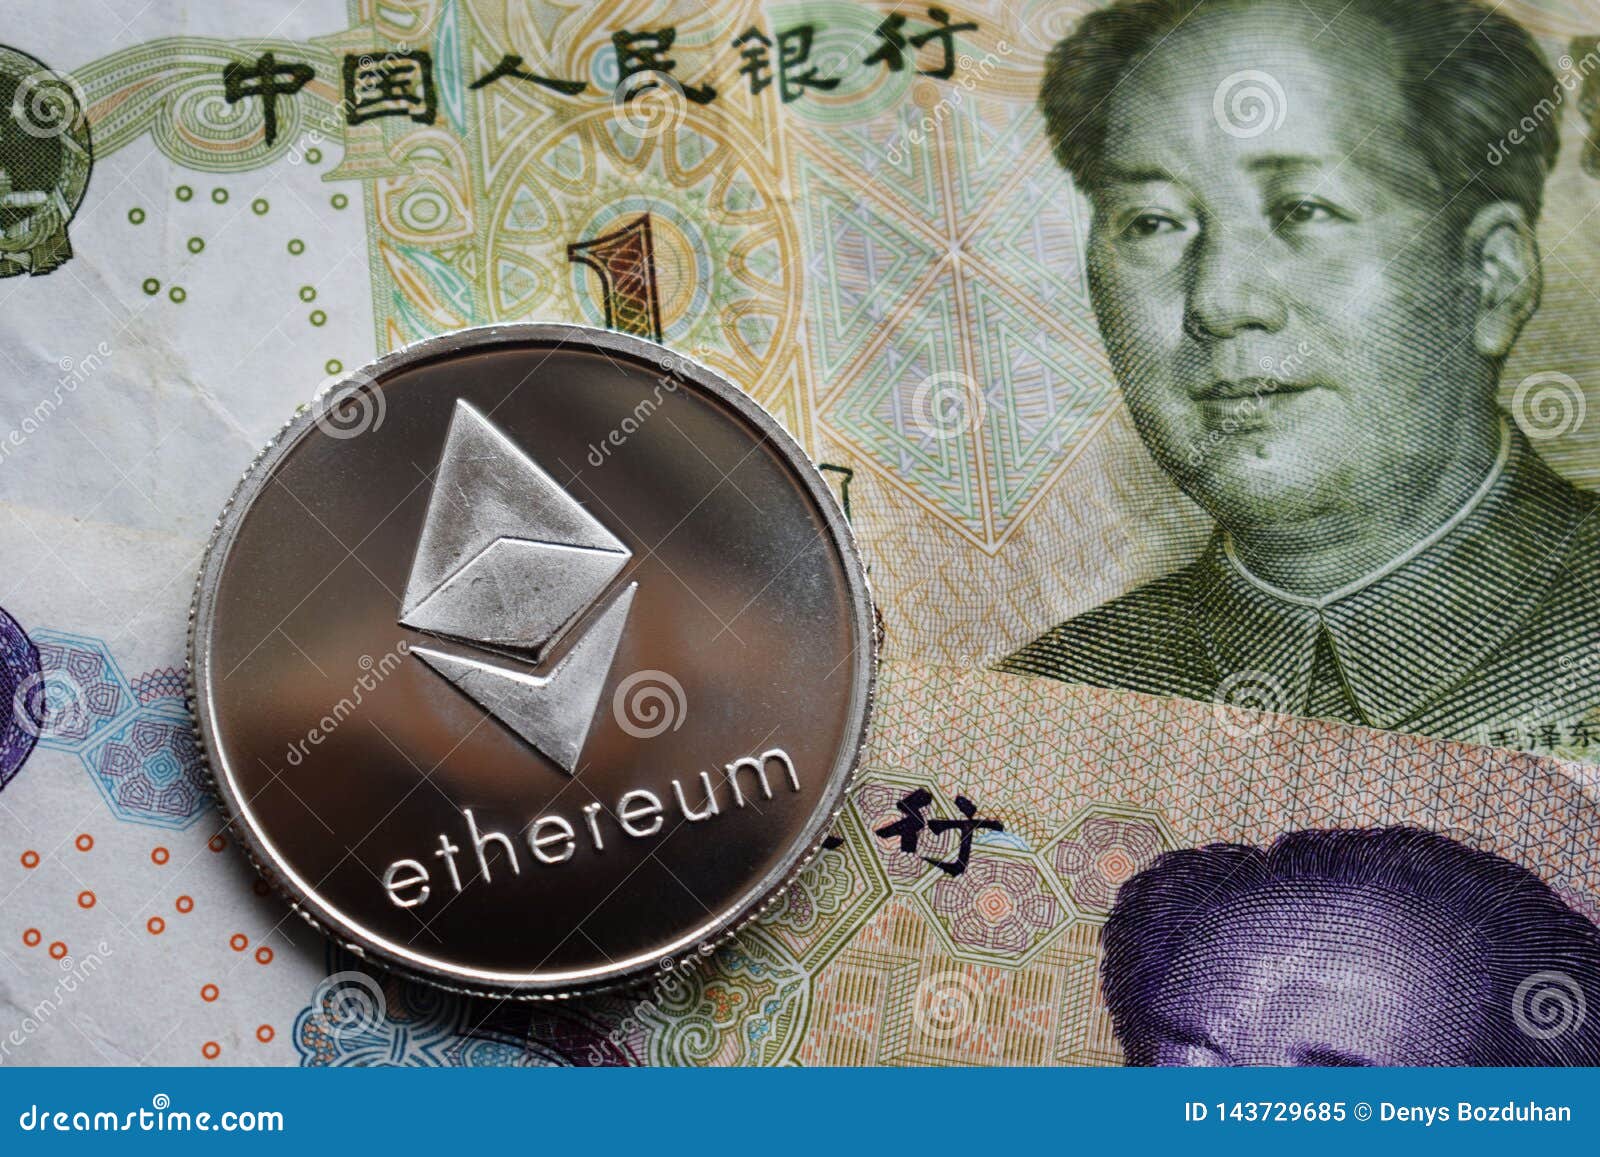 average rate ethereum chinese yuan